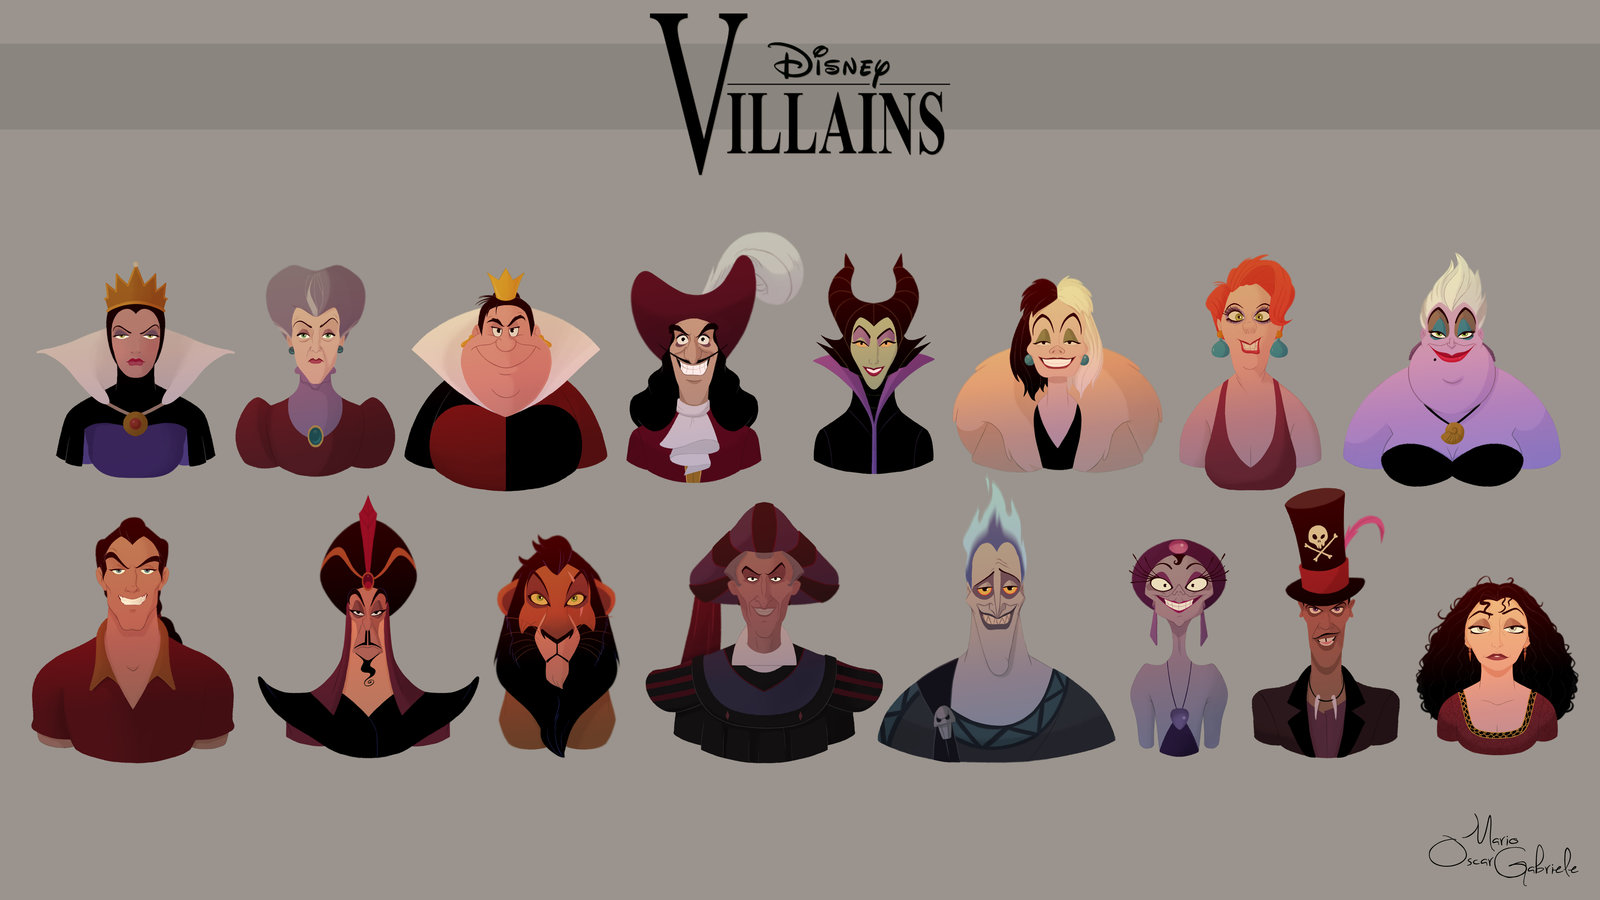 Disney Villains Collection work in progress by MarioOscarGabriele on